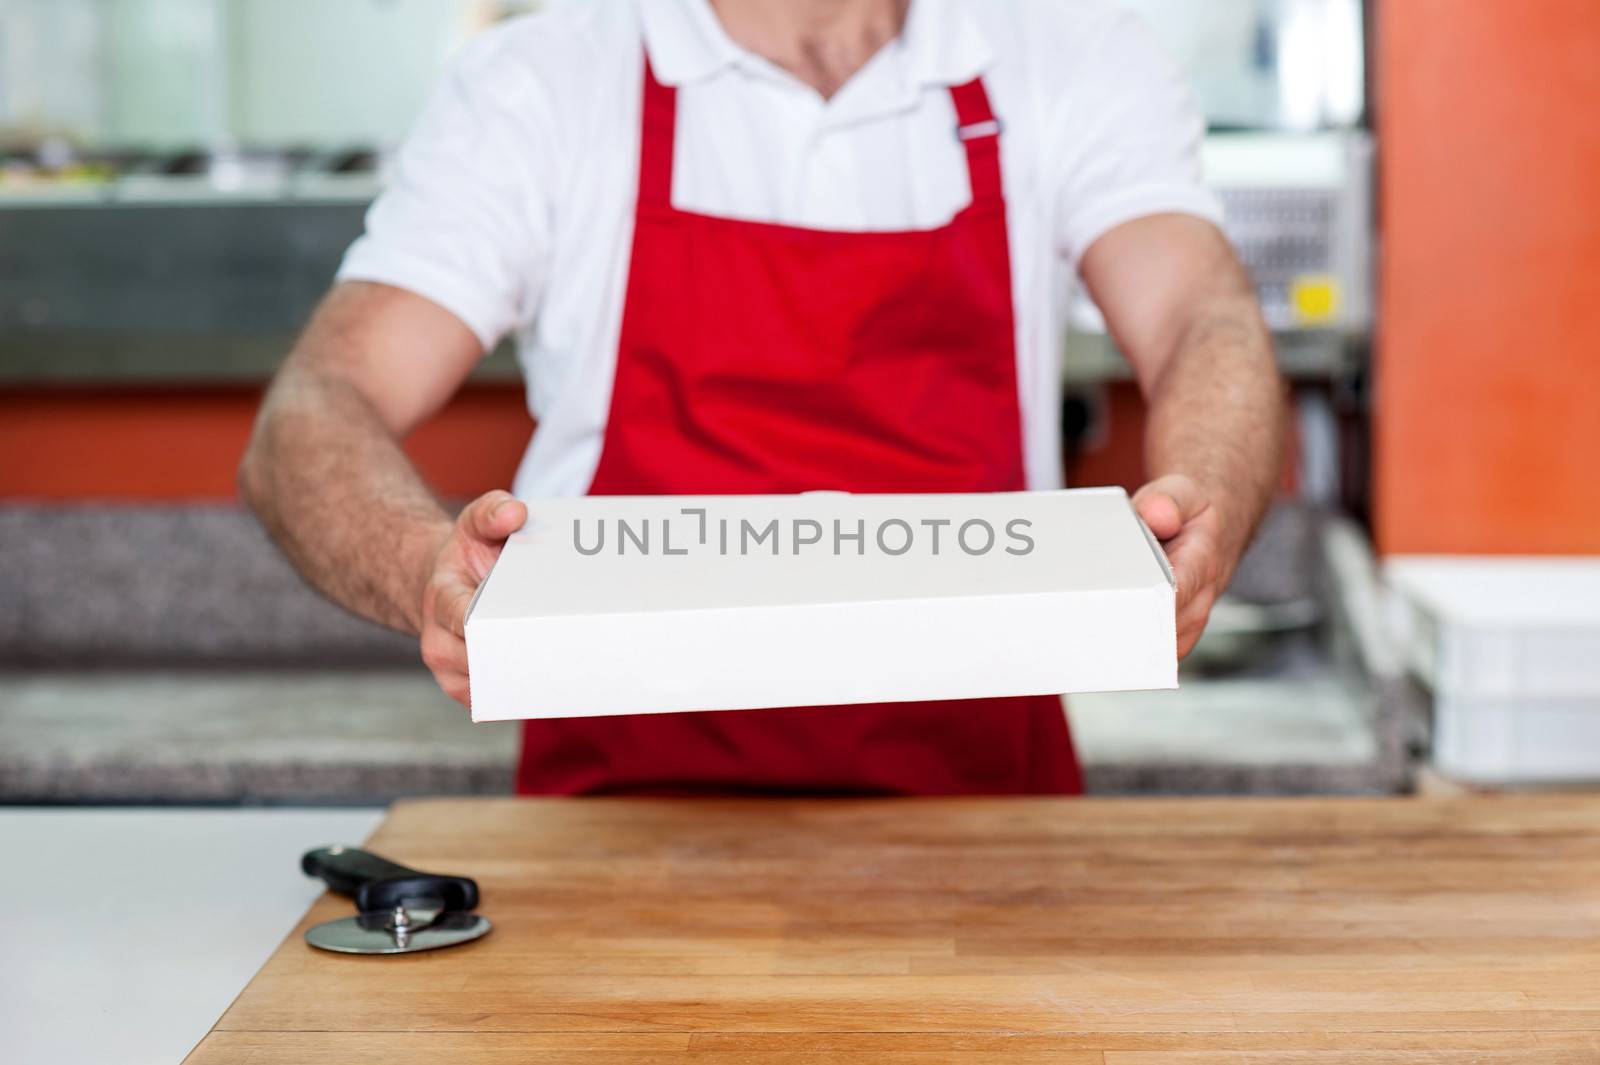 Chef handing over pizza, cropped image.